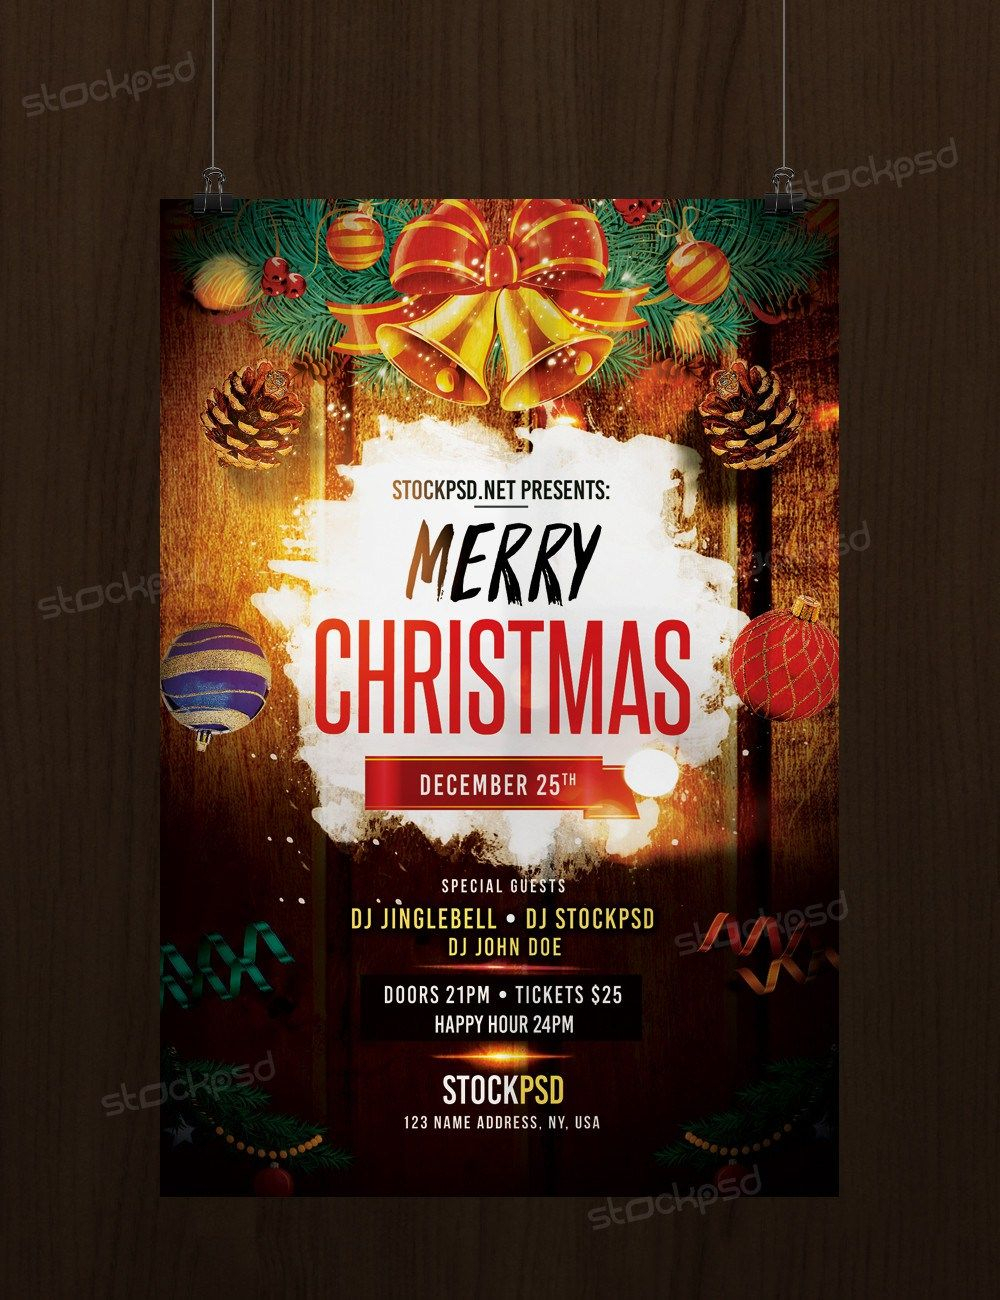 Download Merry Christmas – Free Psd Flyer Template | Free For Christmas Brochure Templates Free